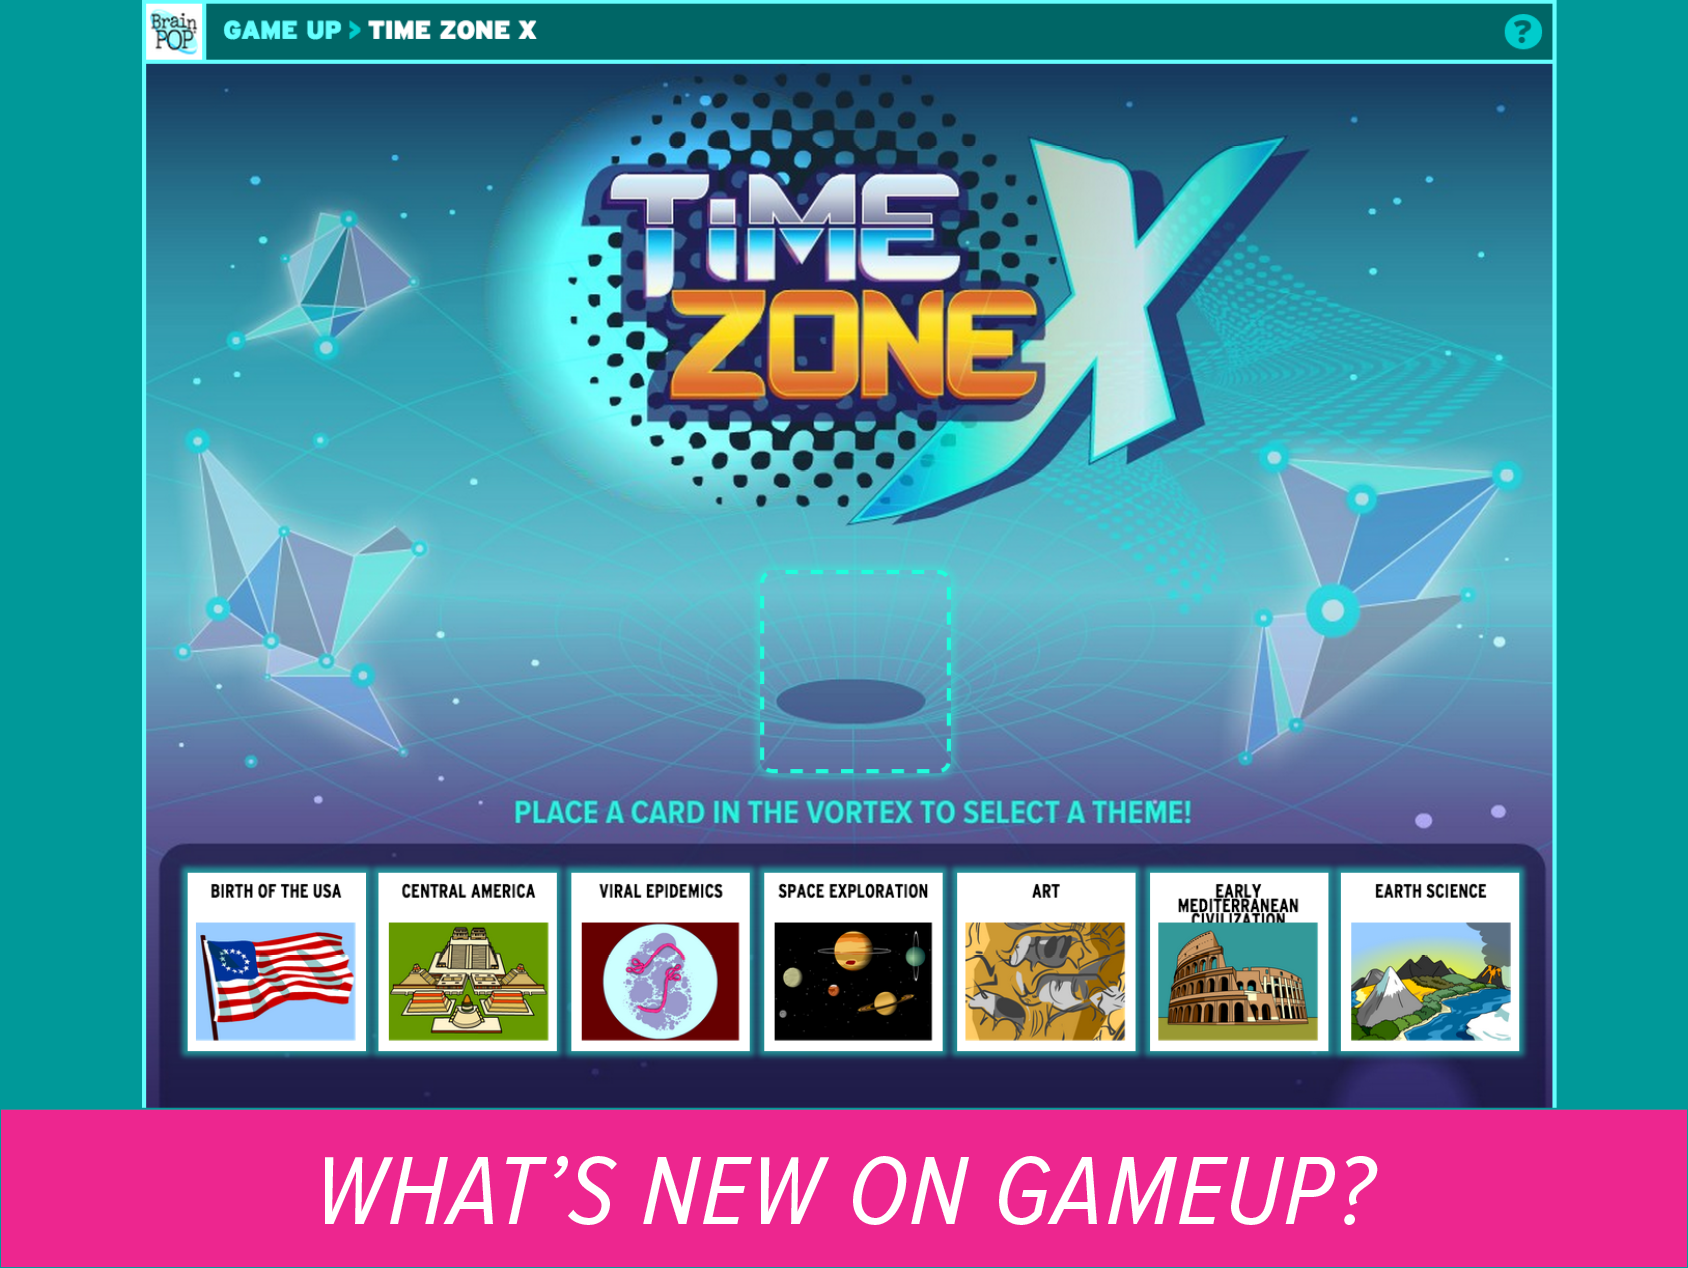 New on GameUp: Time Zone X